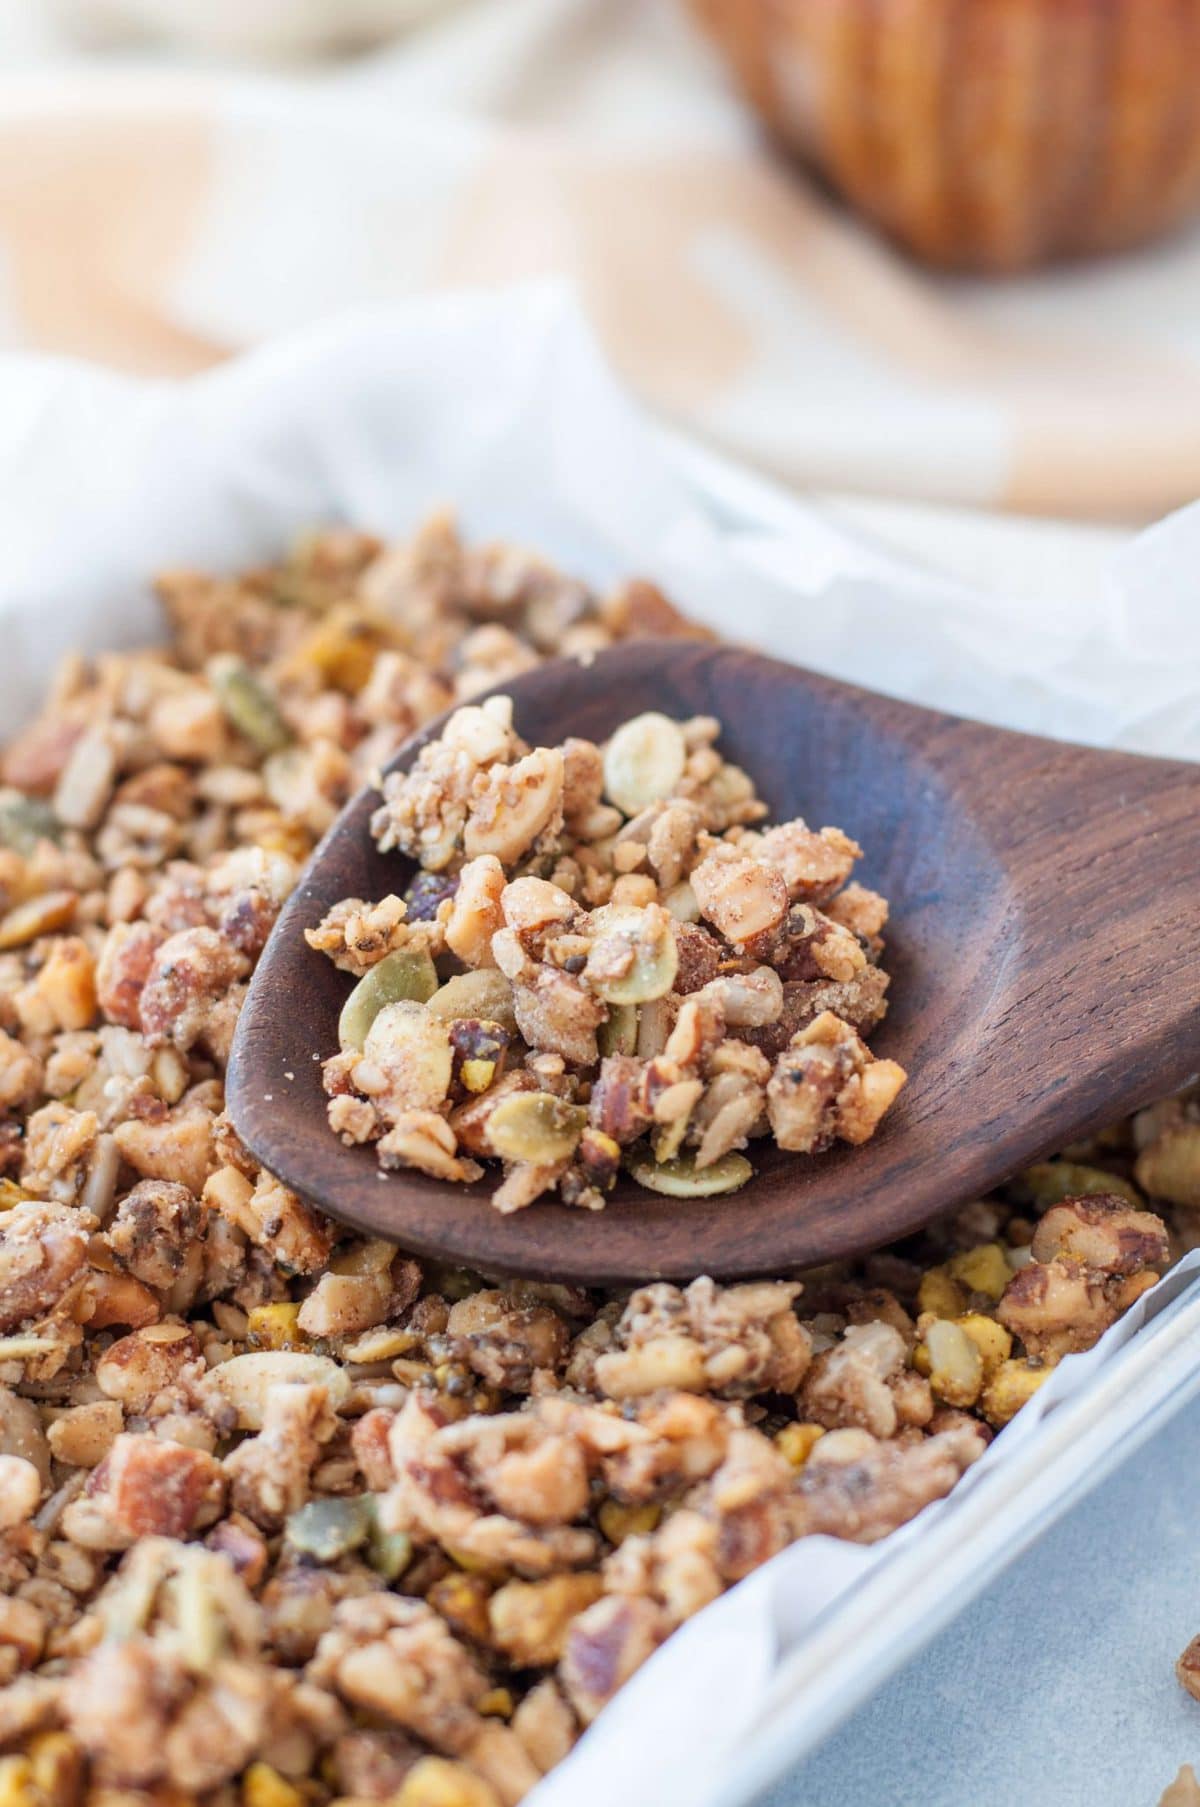 Granola fresh out of the oven on a baking sheet with a wooden spoon